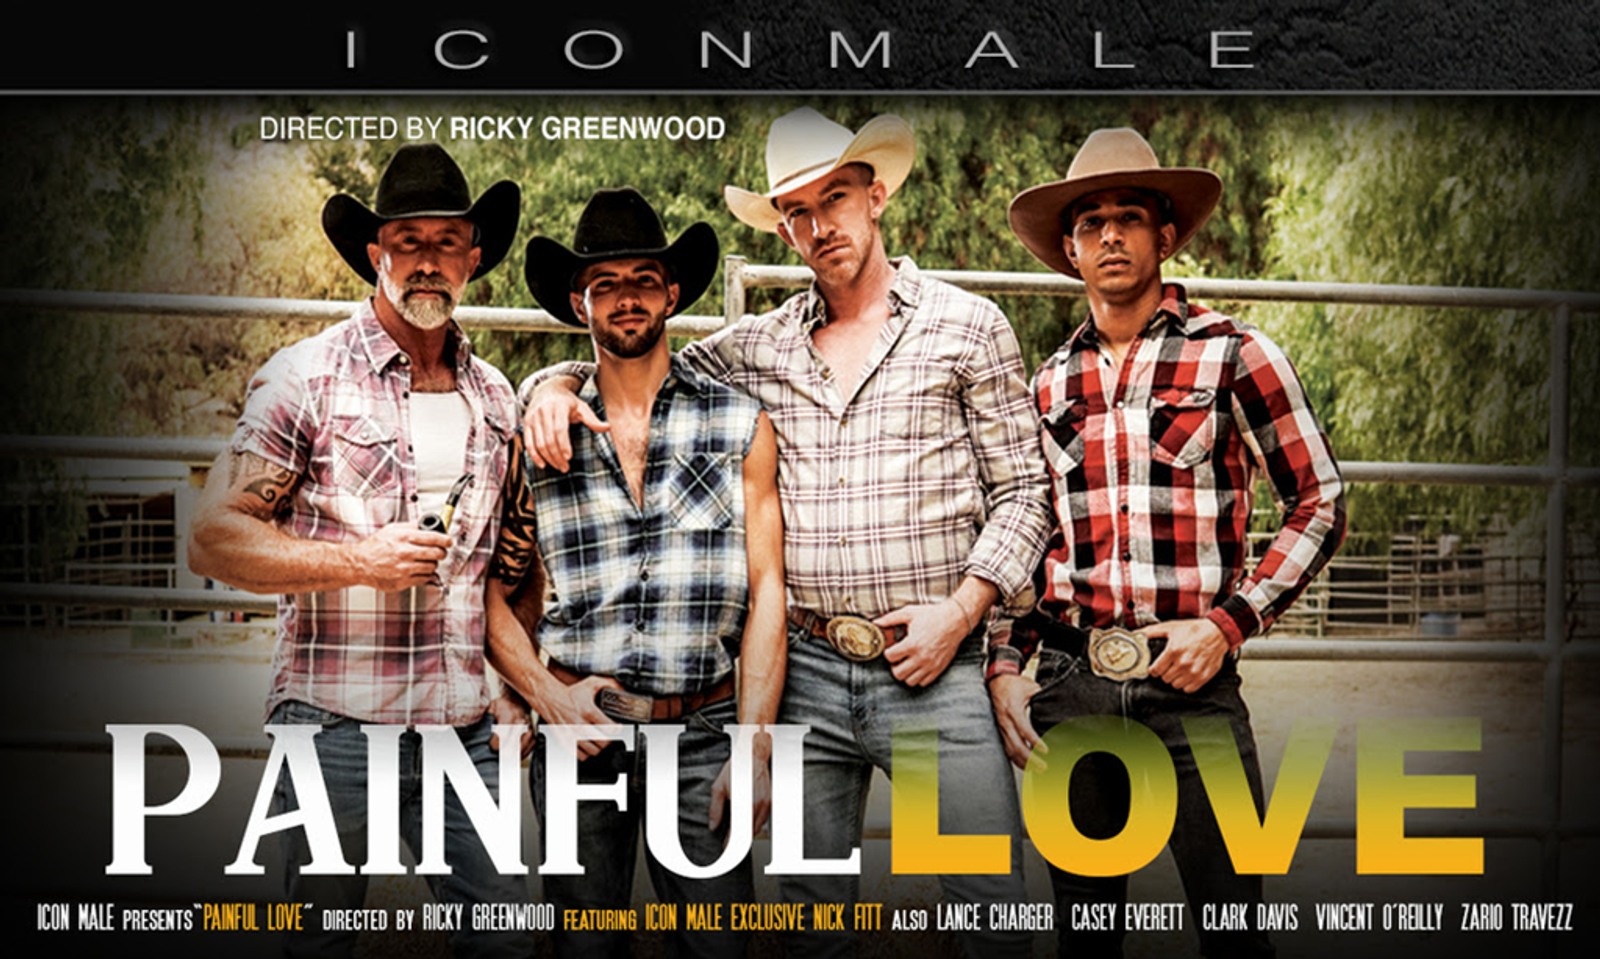 Nick Fitt, Icon Male's New Contract Star, Stars In ‘Painful Love’